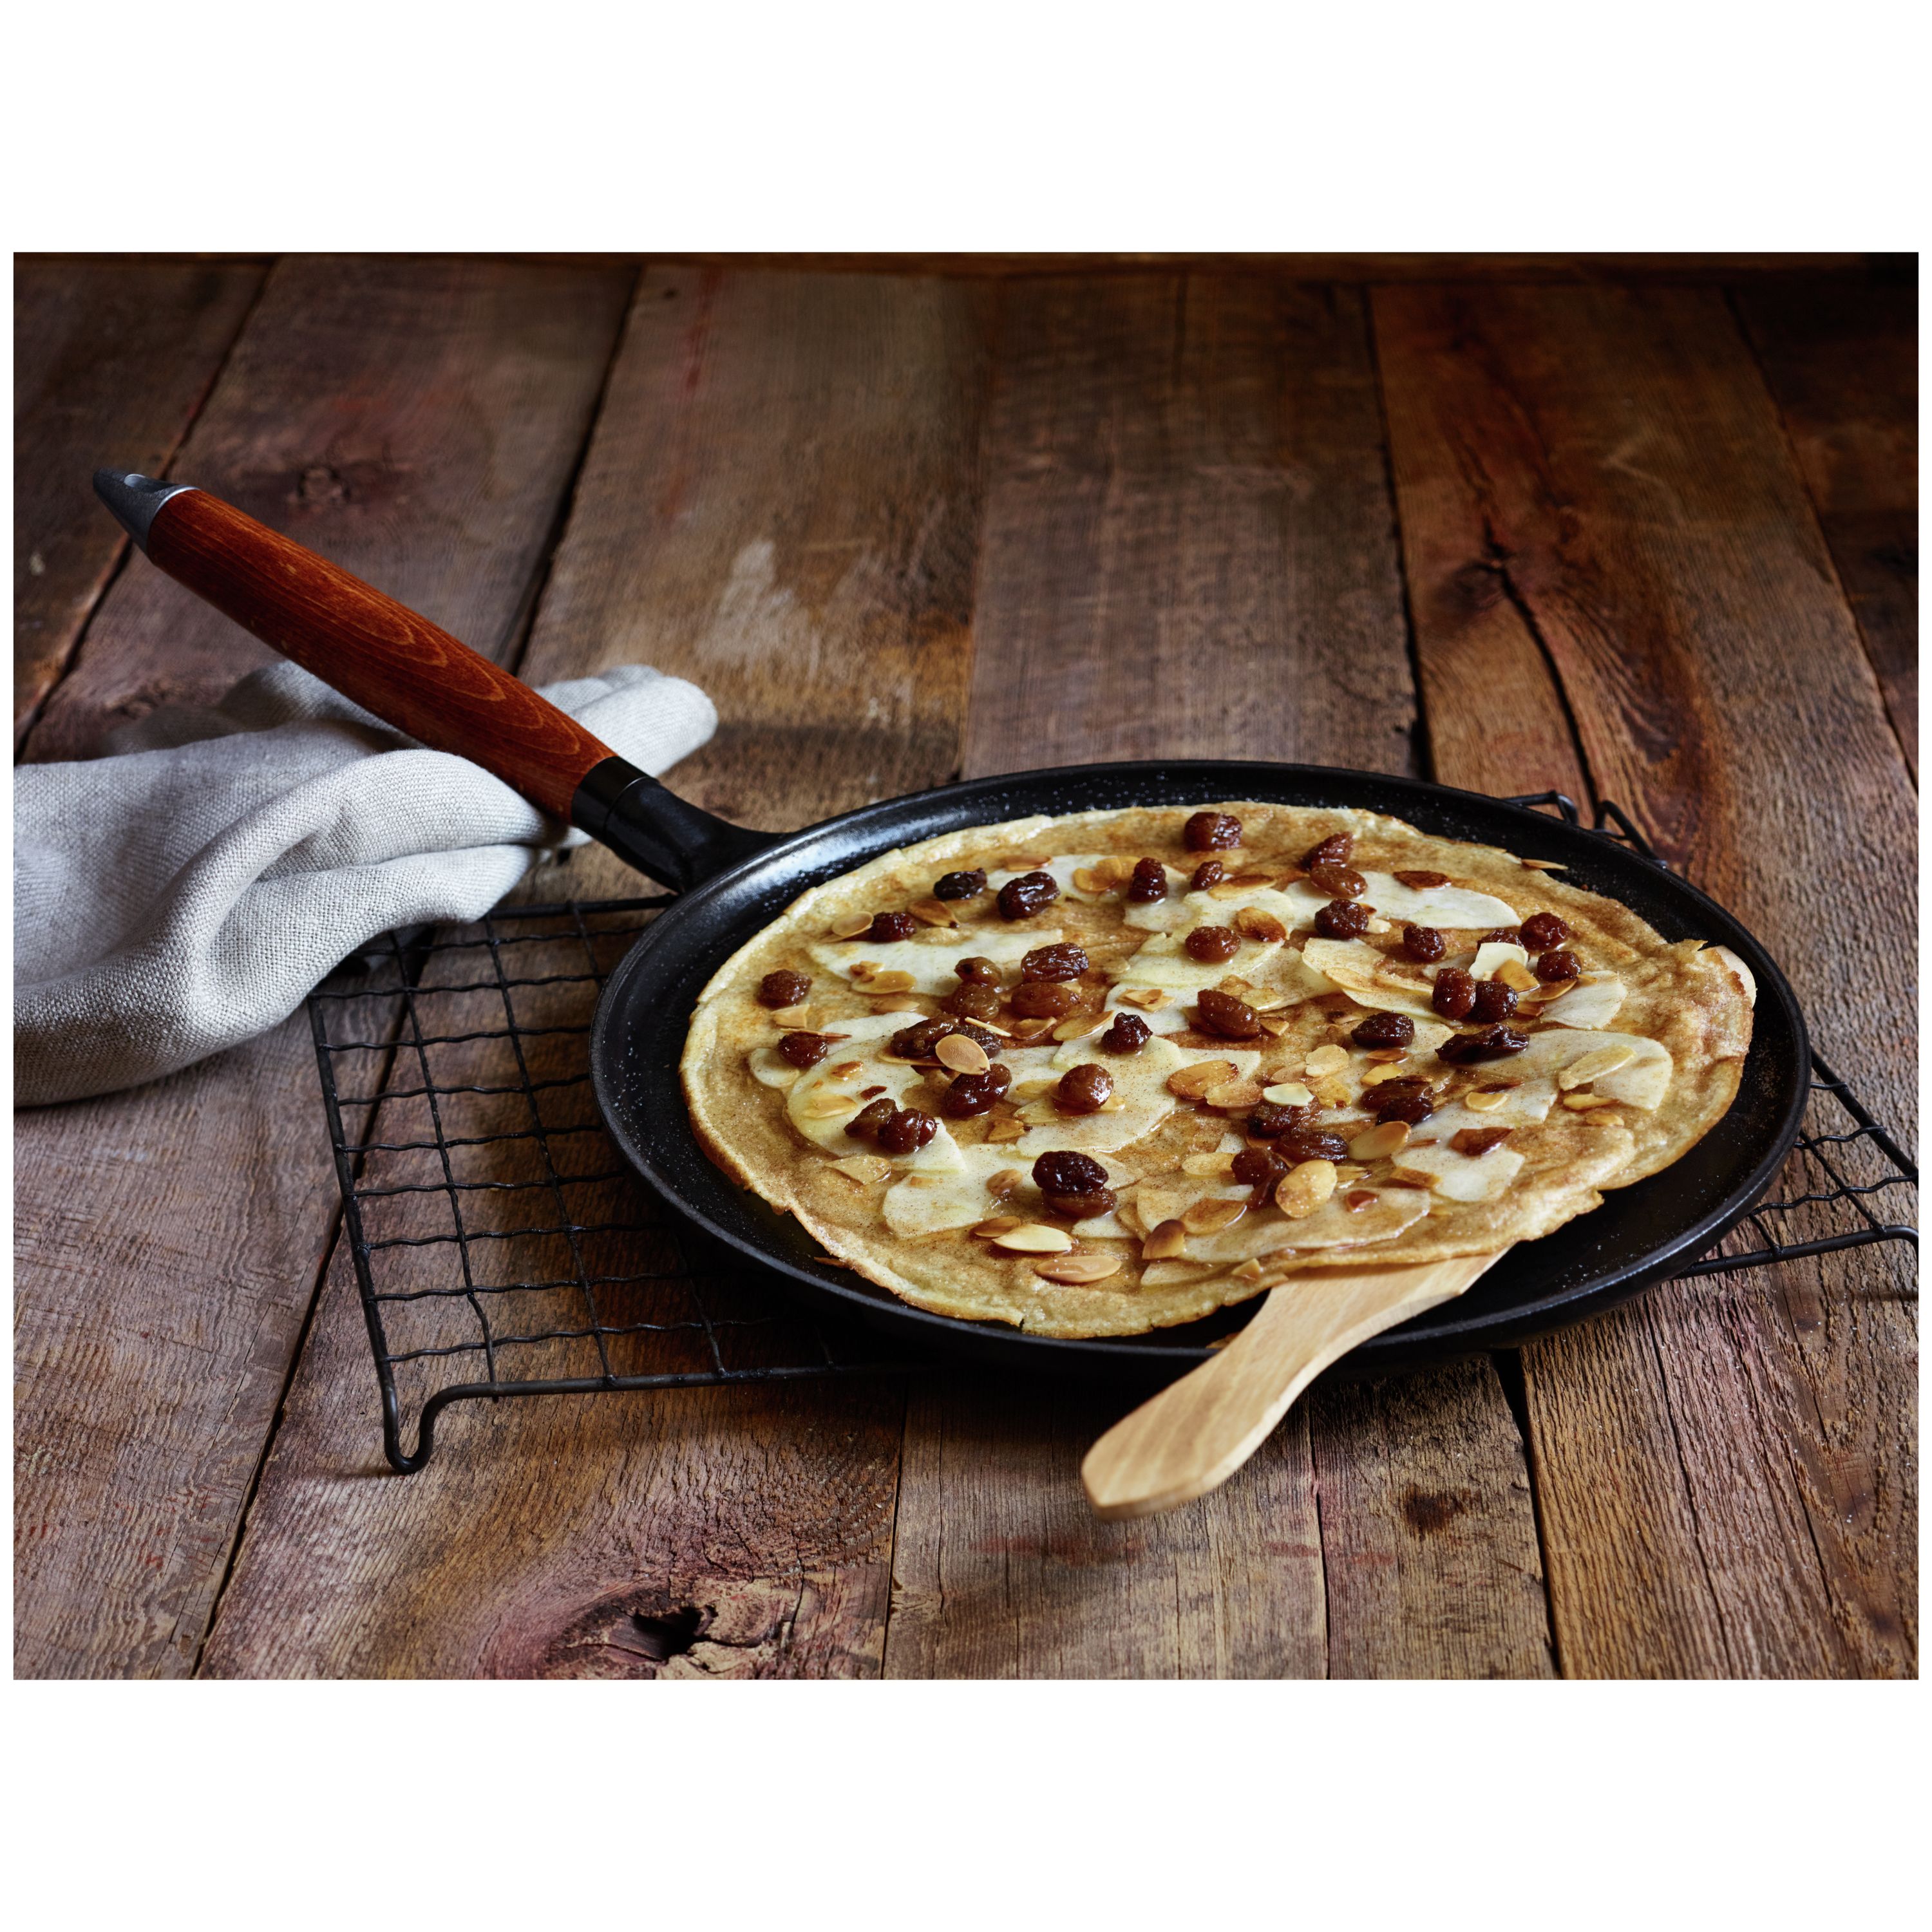 Staub 11 Crepe Pan with Spreader